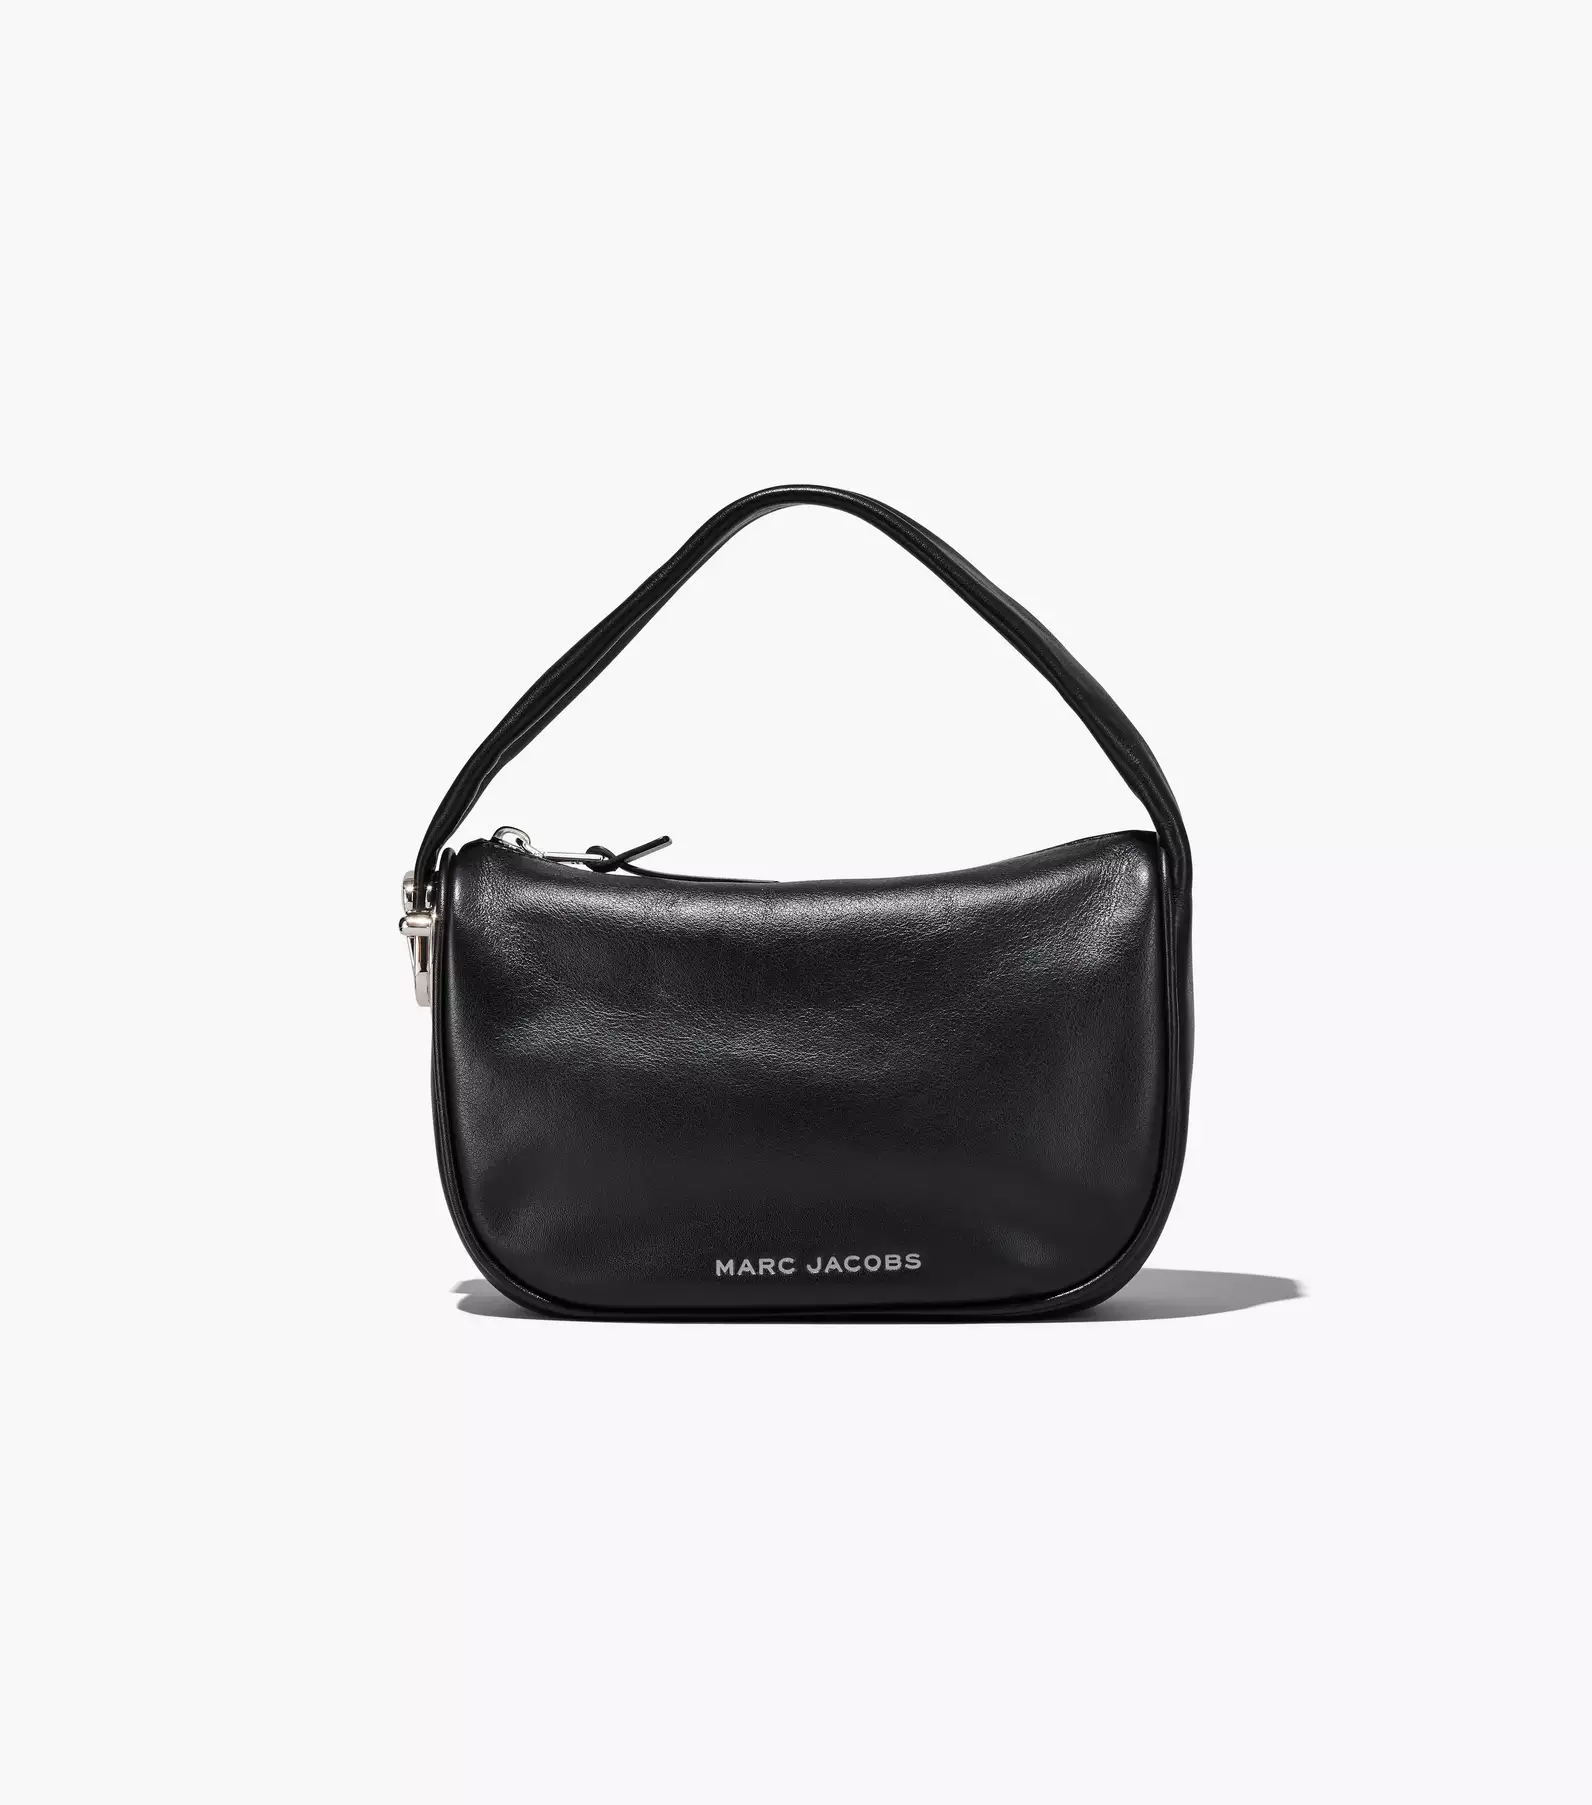  Over Earth Genuine Leather Small Hobo Crossbody Bags